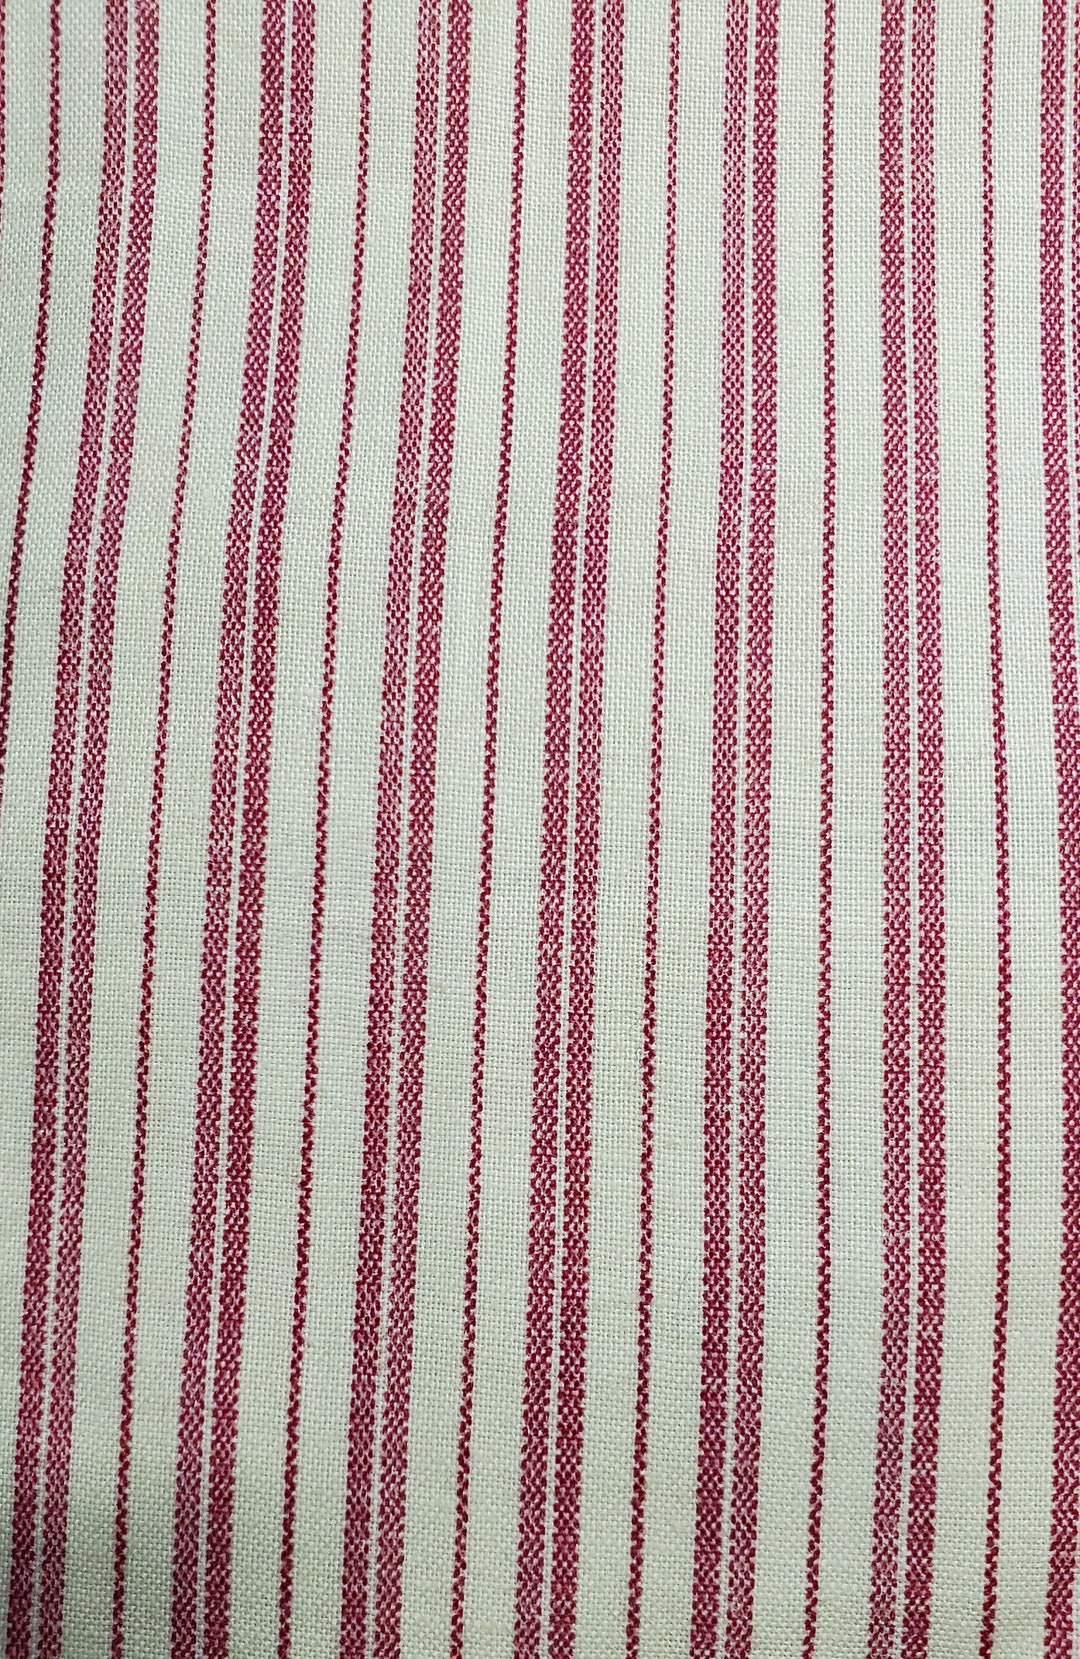 1980s Vintage Red Striped Calico Fabric 45 X 21 - Etsy